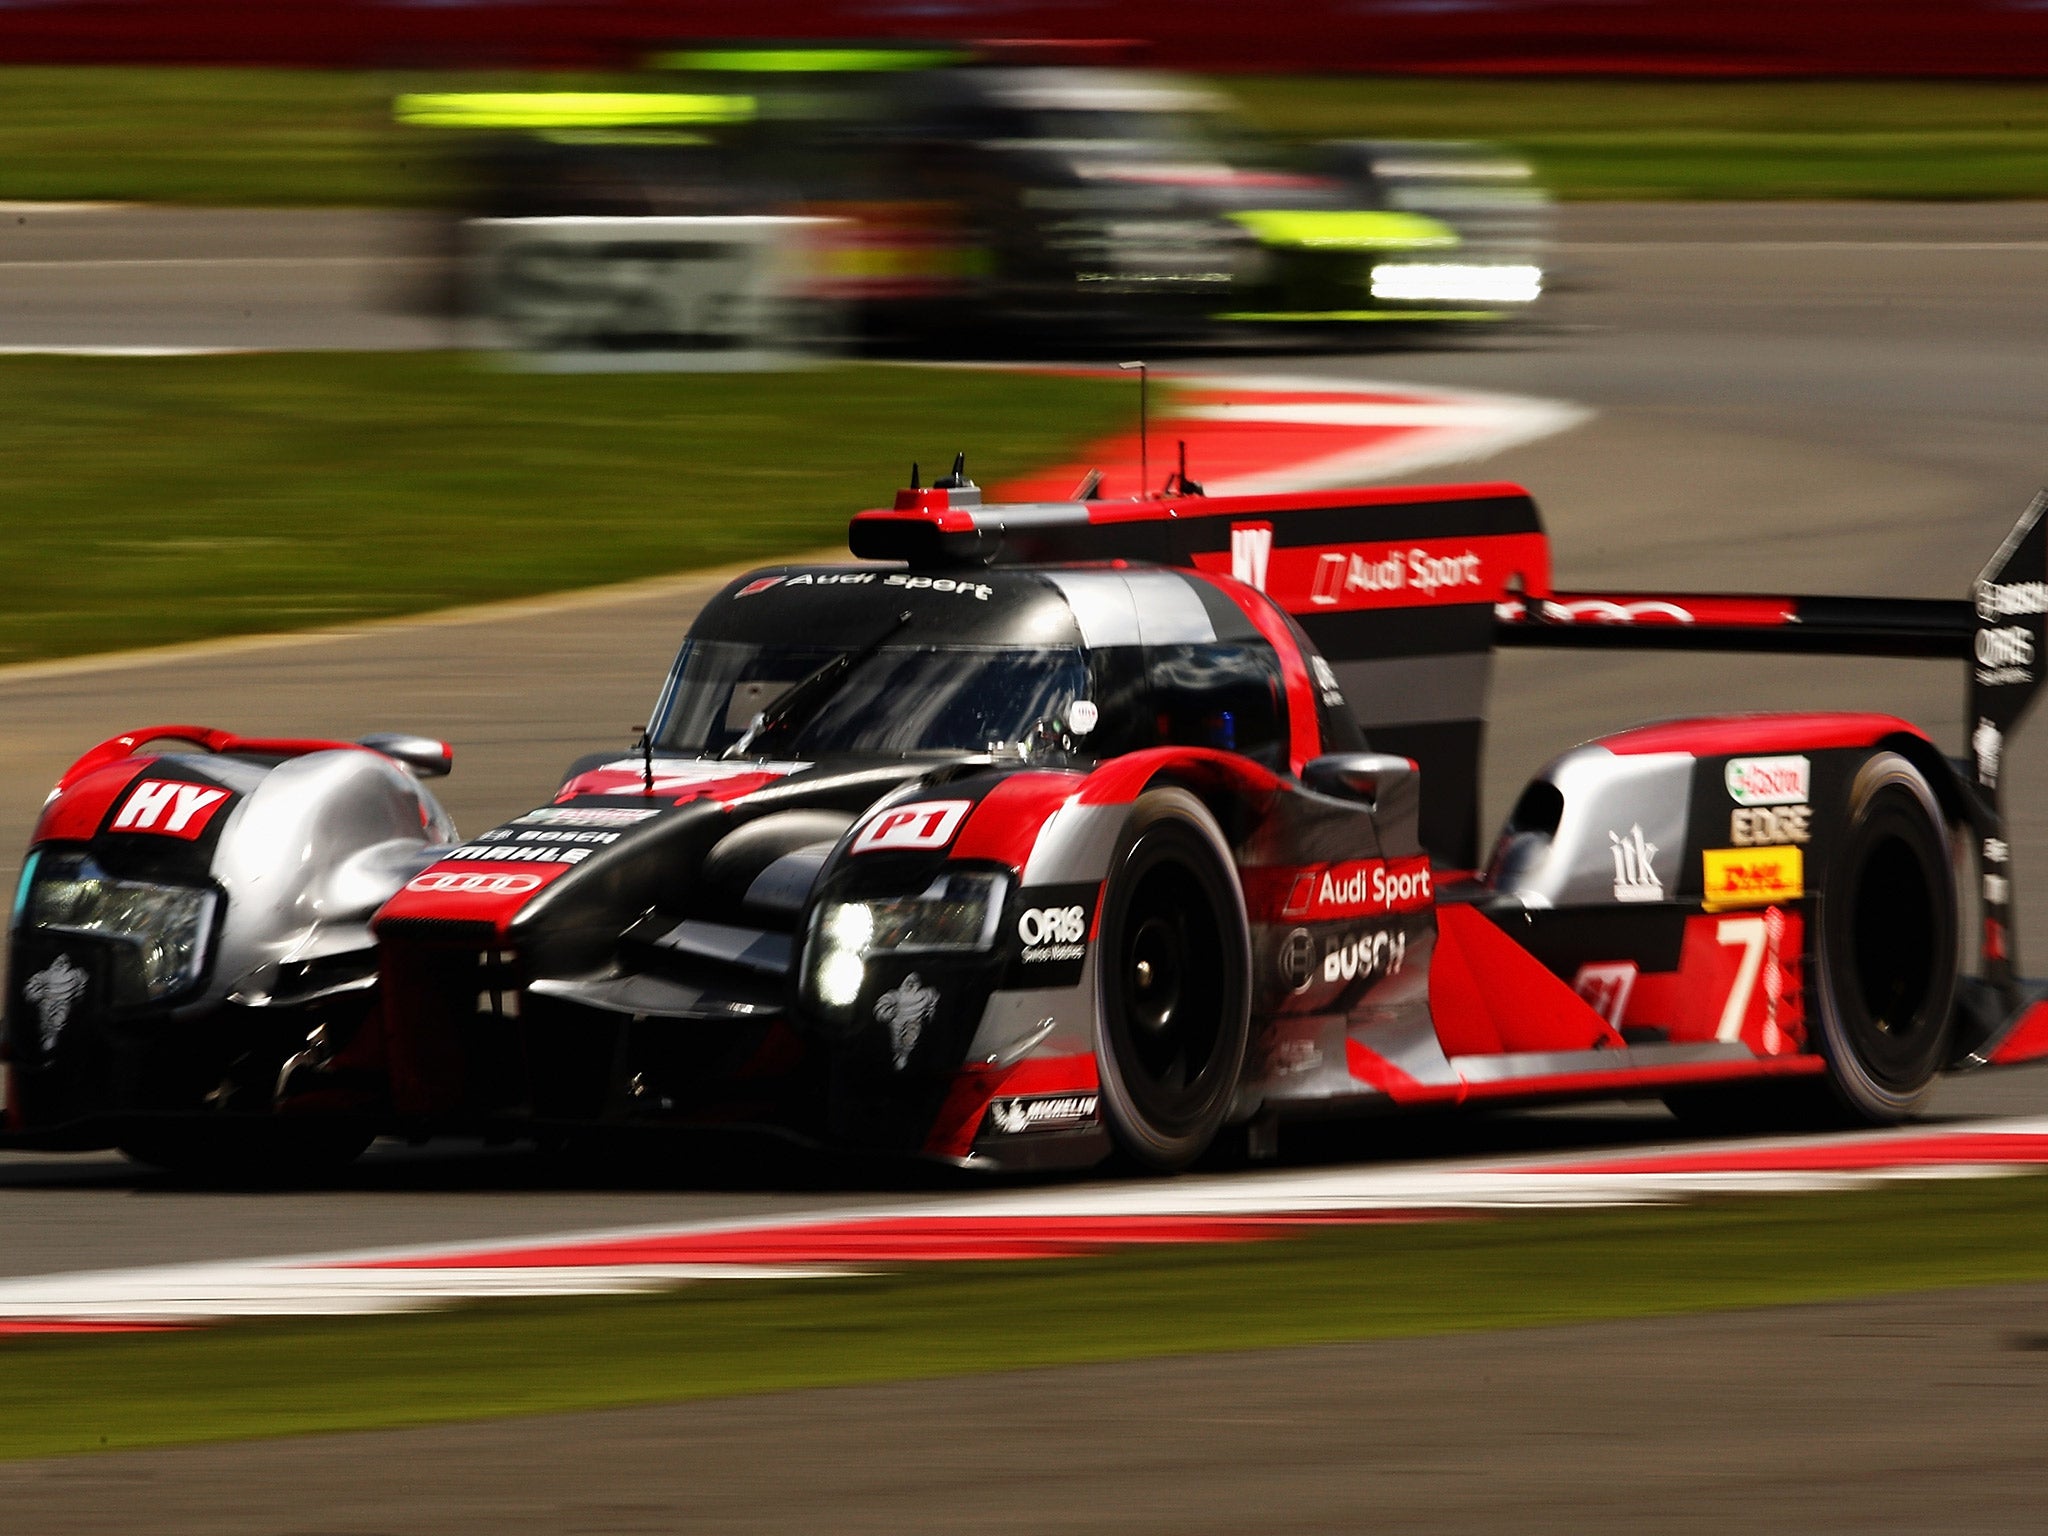 The No 7 Audi took the chequered flag by 47 seconds before being excluded